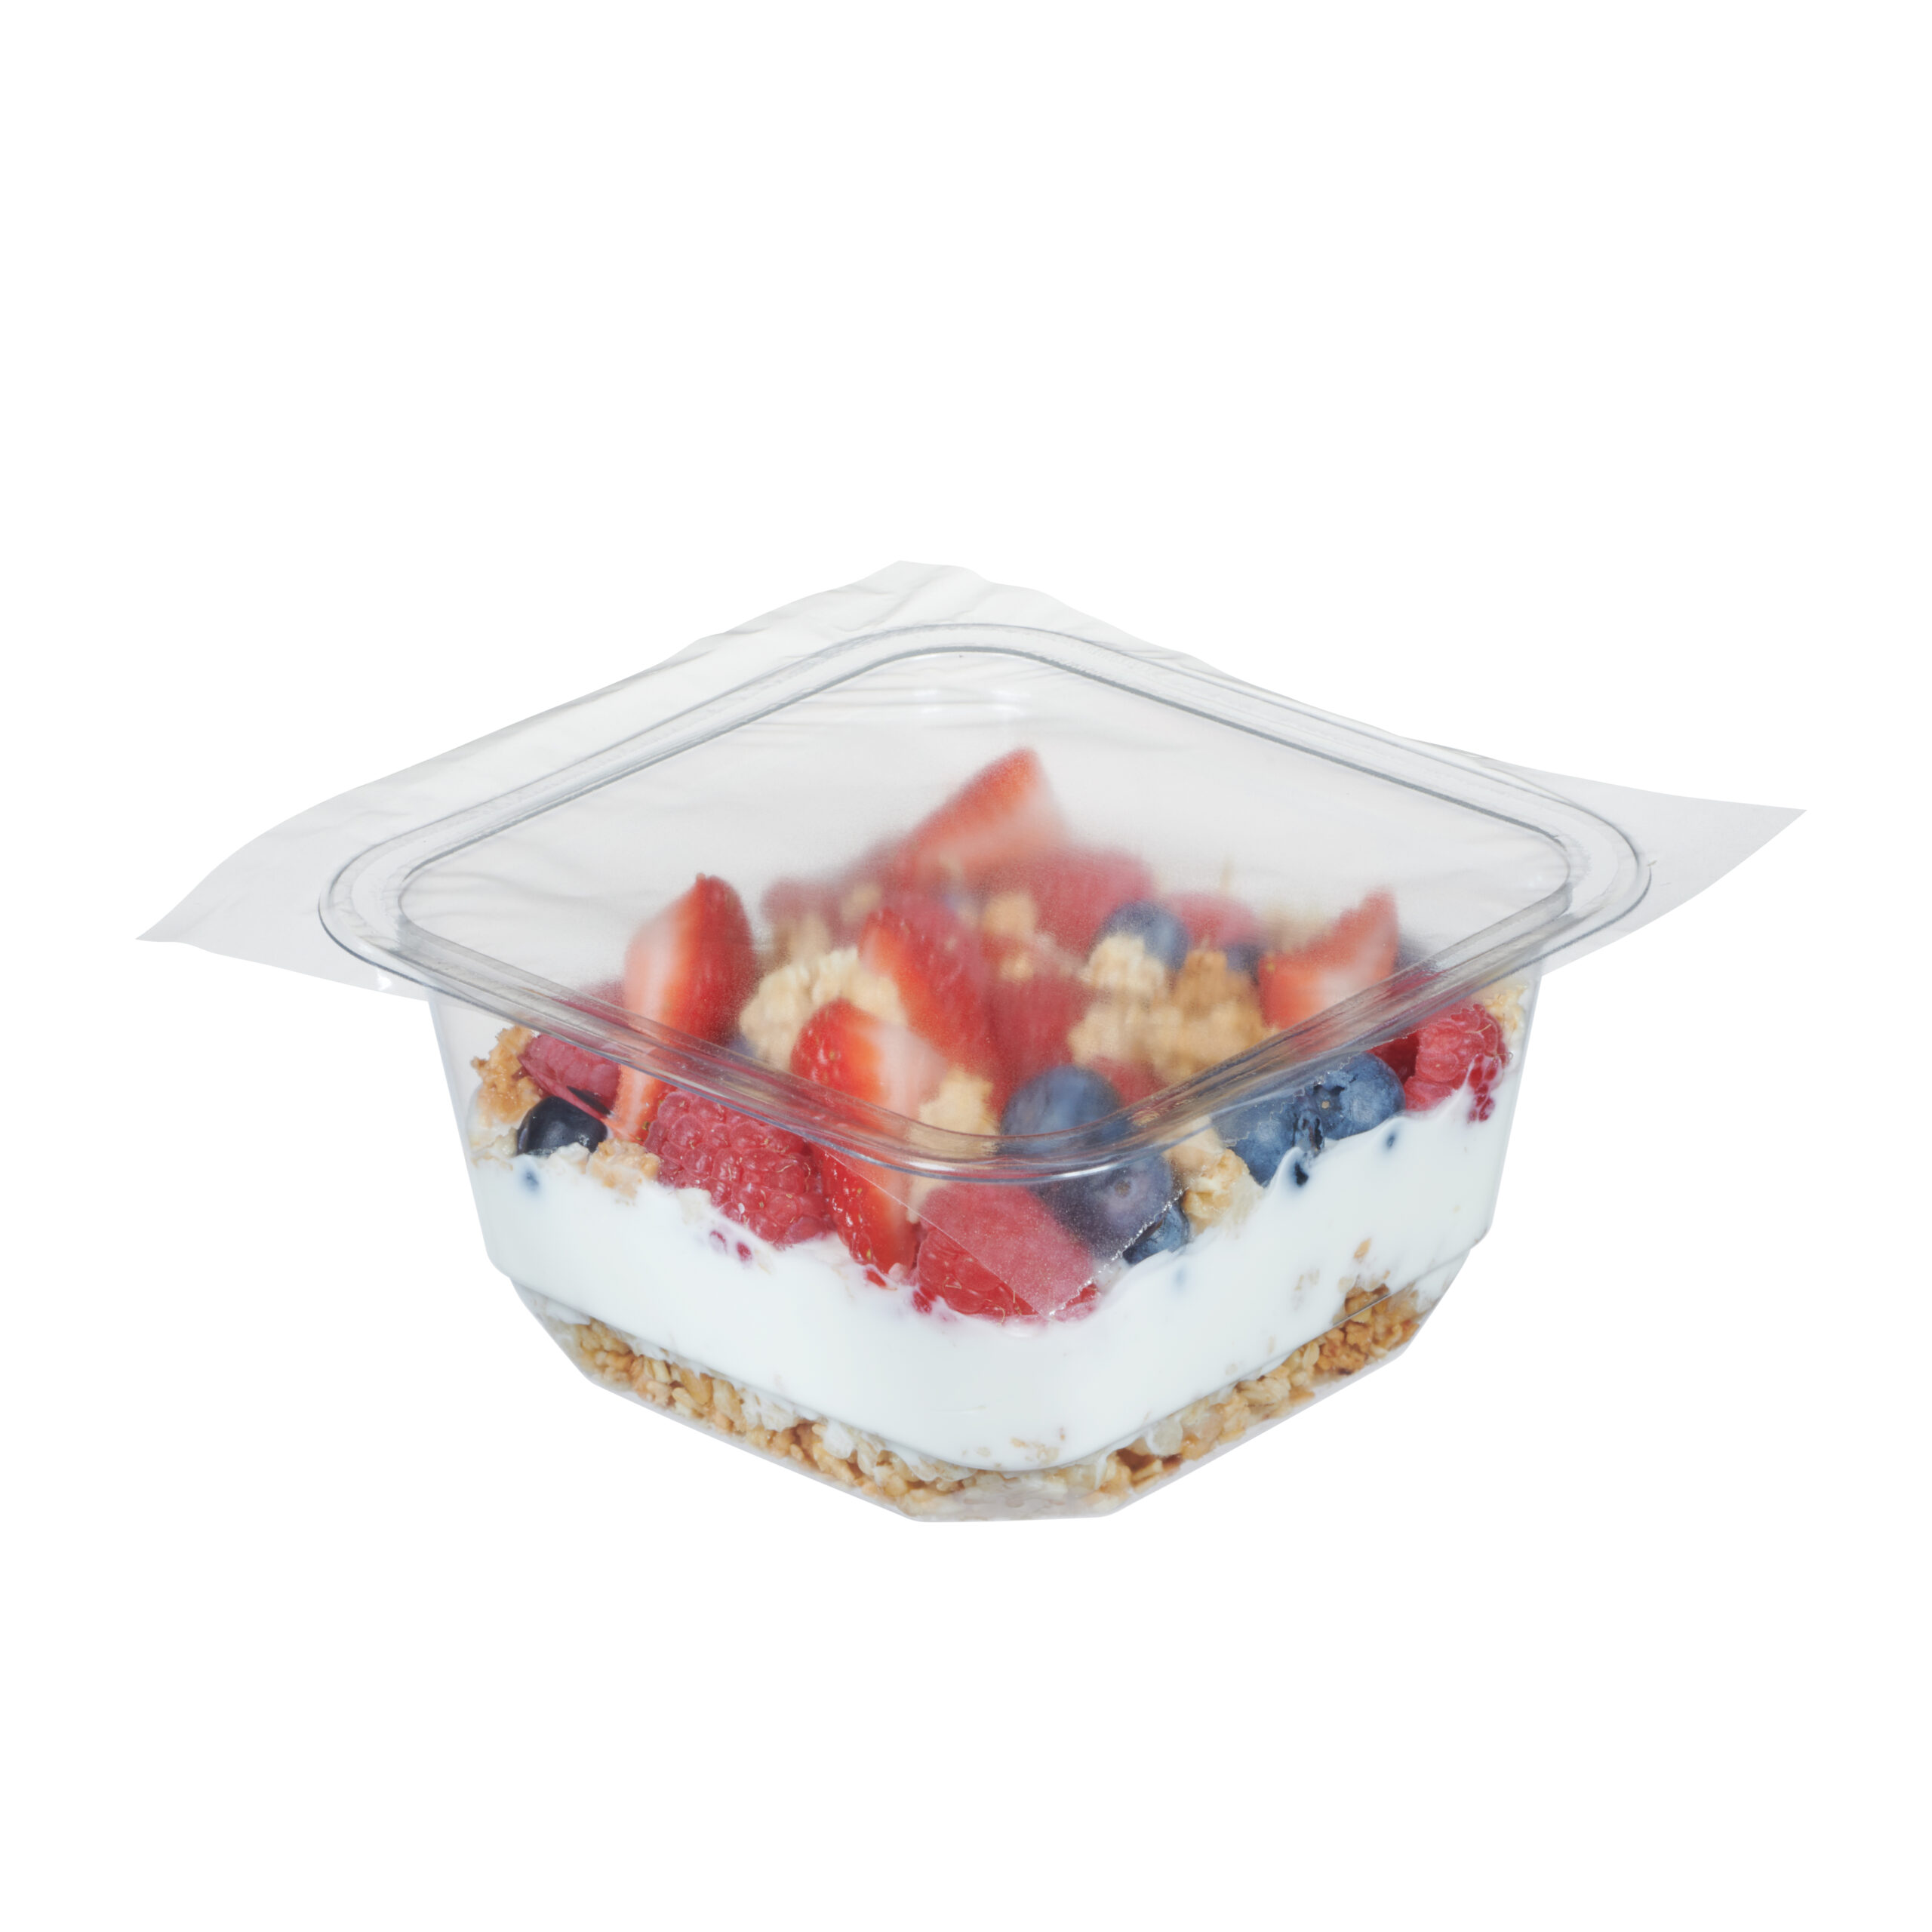 Clear plastic food tray with a yogurt parfait, sealed with film